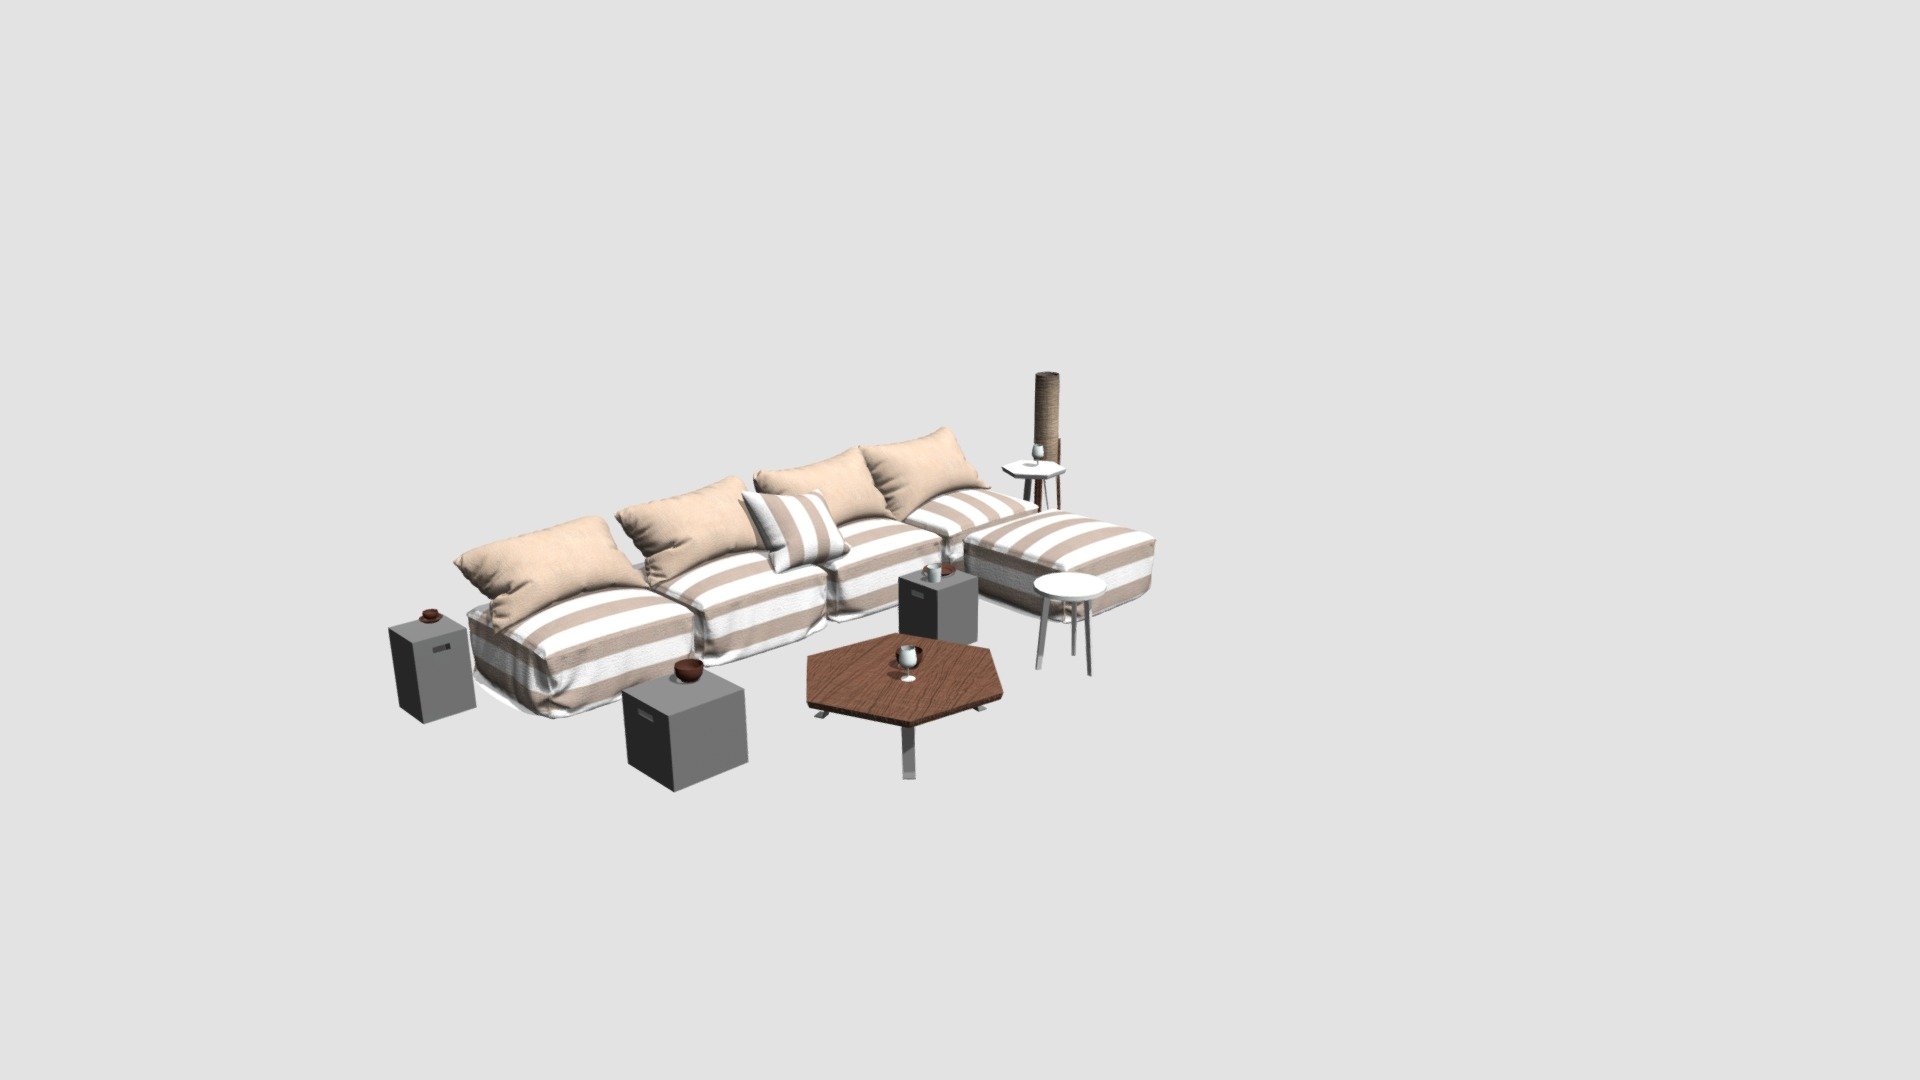 Highly detailed 3d models of furniture with all textures, shaders and materials. It is ready to use, just put it into your scene 3d model